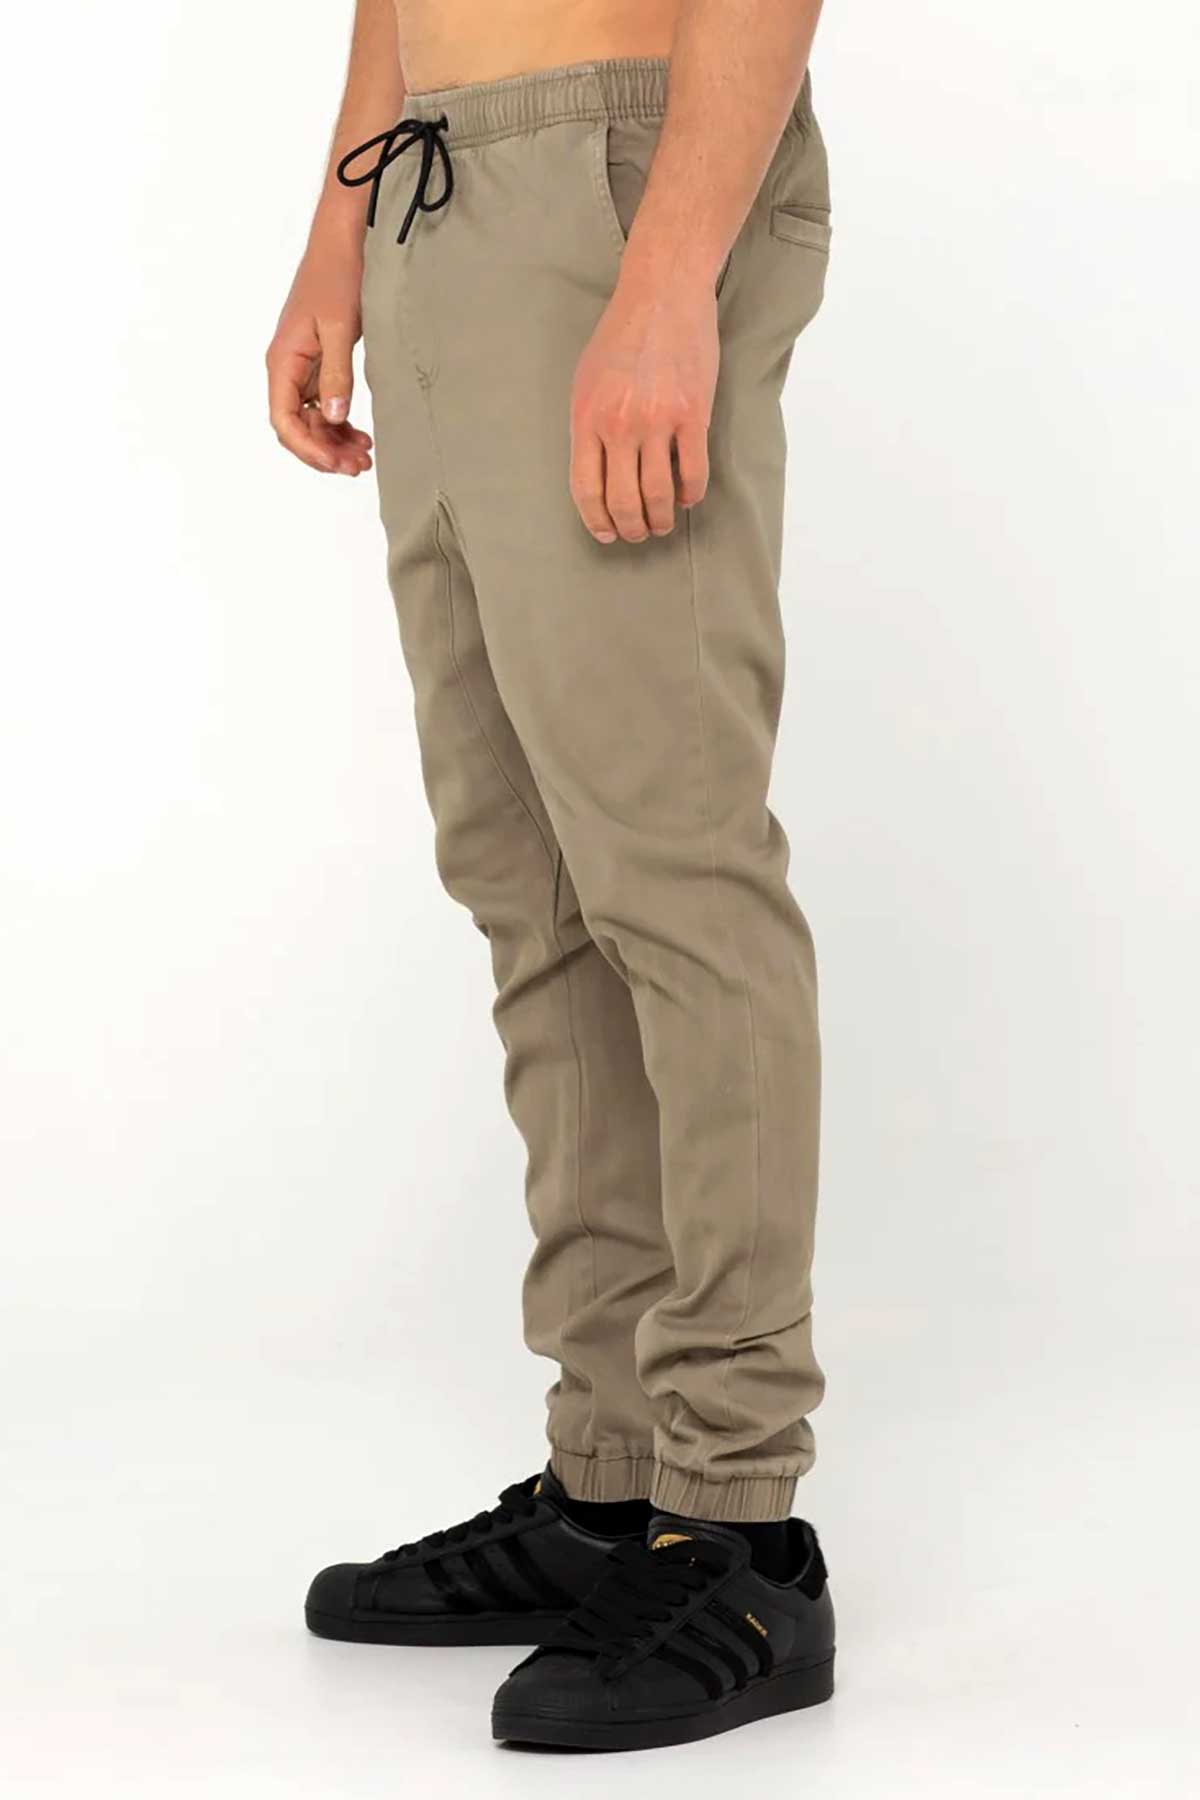 Rusty Elastic Pant - Hook Out, front and back pockets.